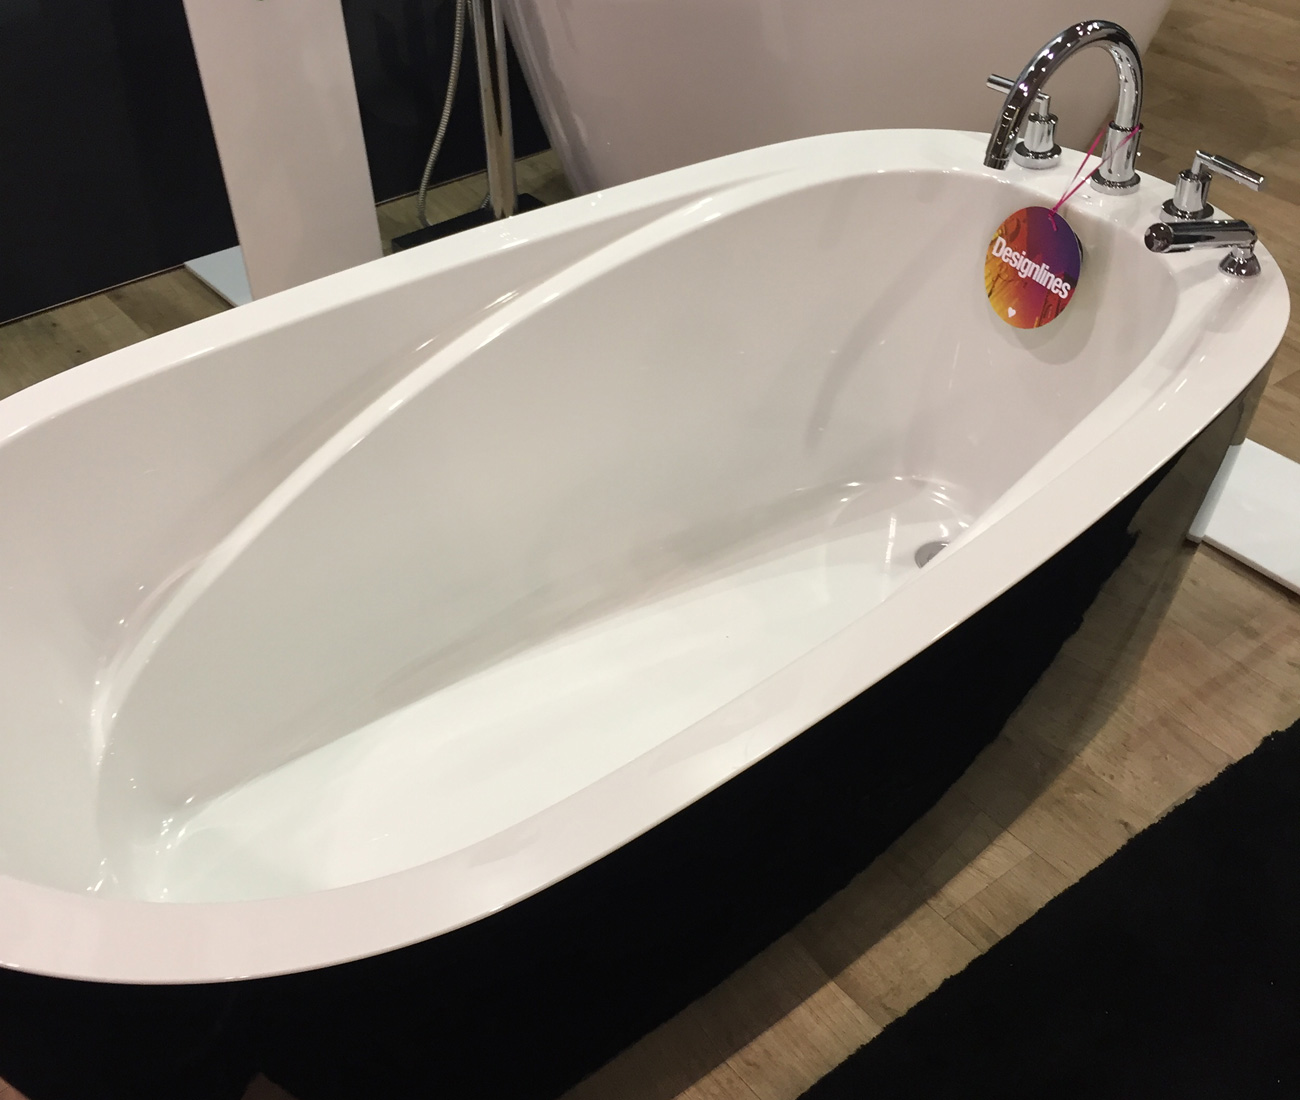 Vapora by Neptune. Have a small bathroom? The freestanding Vapora tub by Quebec-based Neptune comes in Petite as well as Grande. We love its range of colour options and soft, enveloping curves.